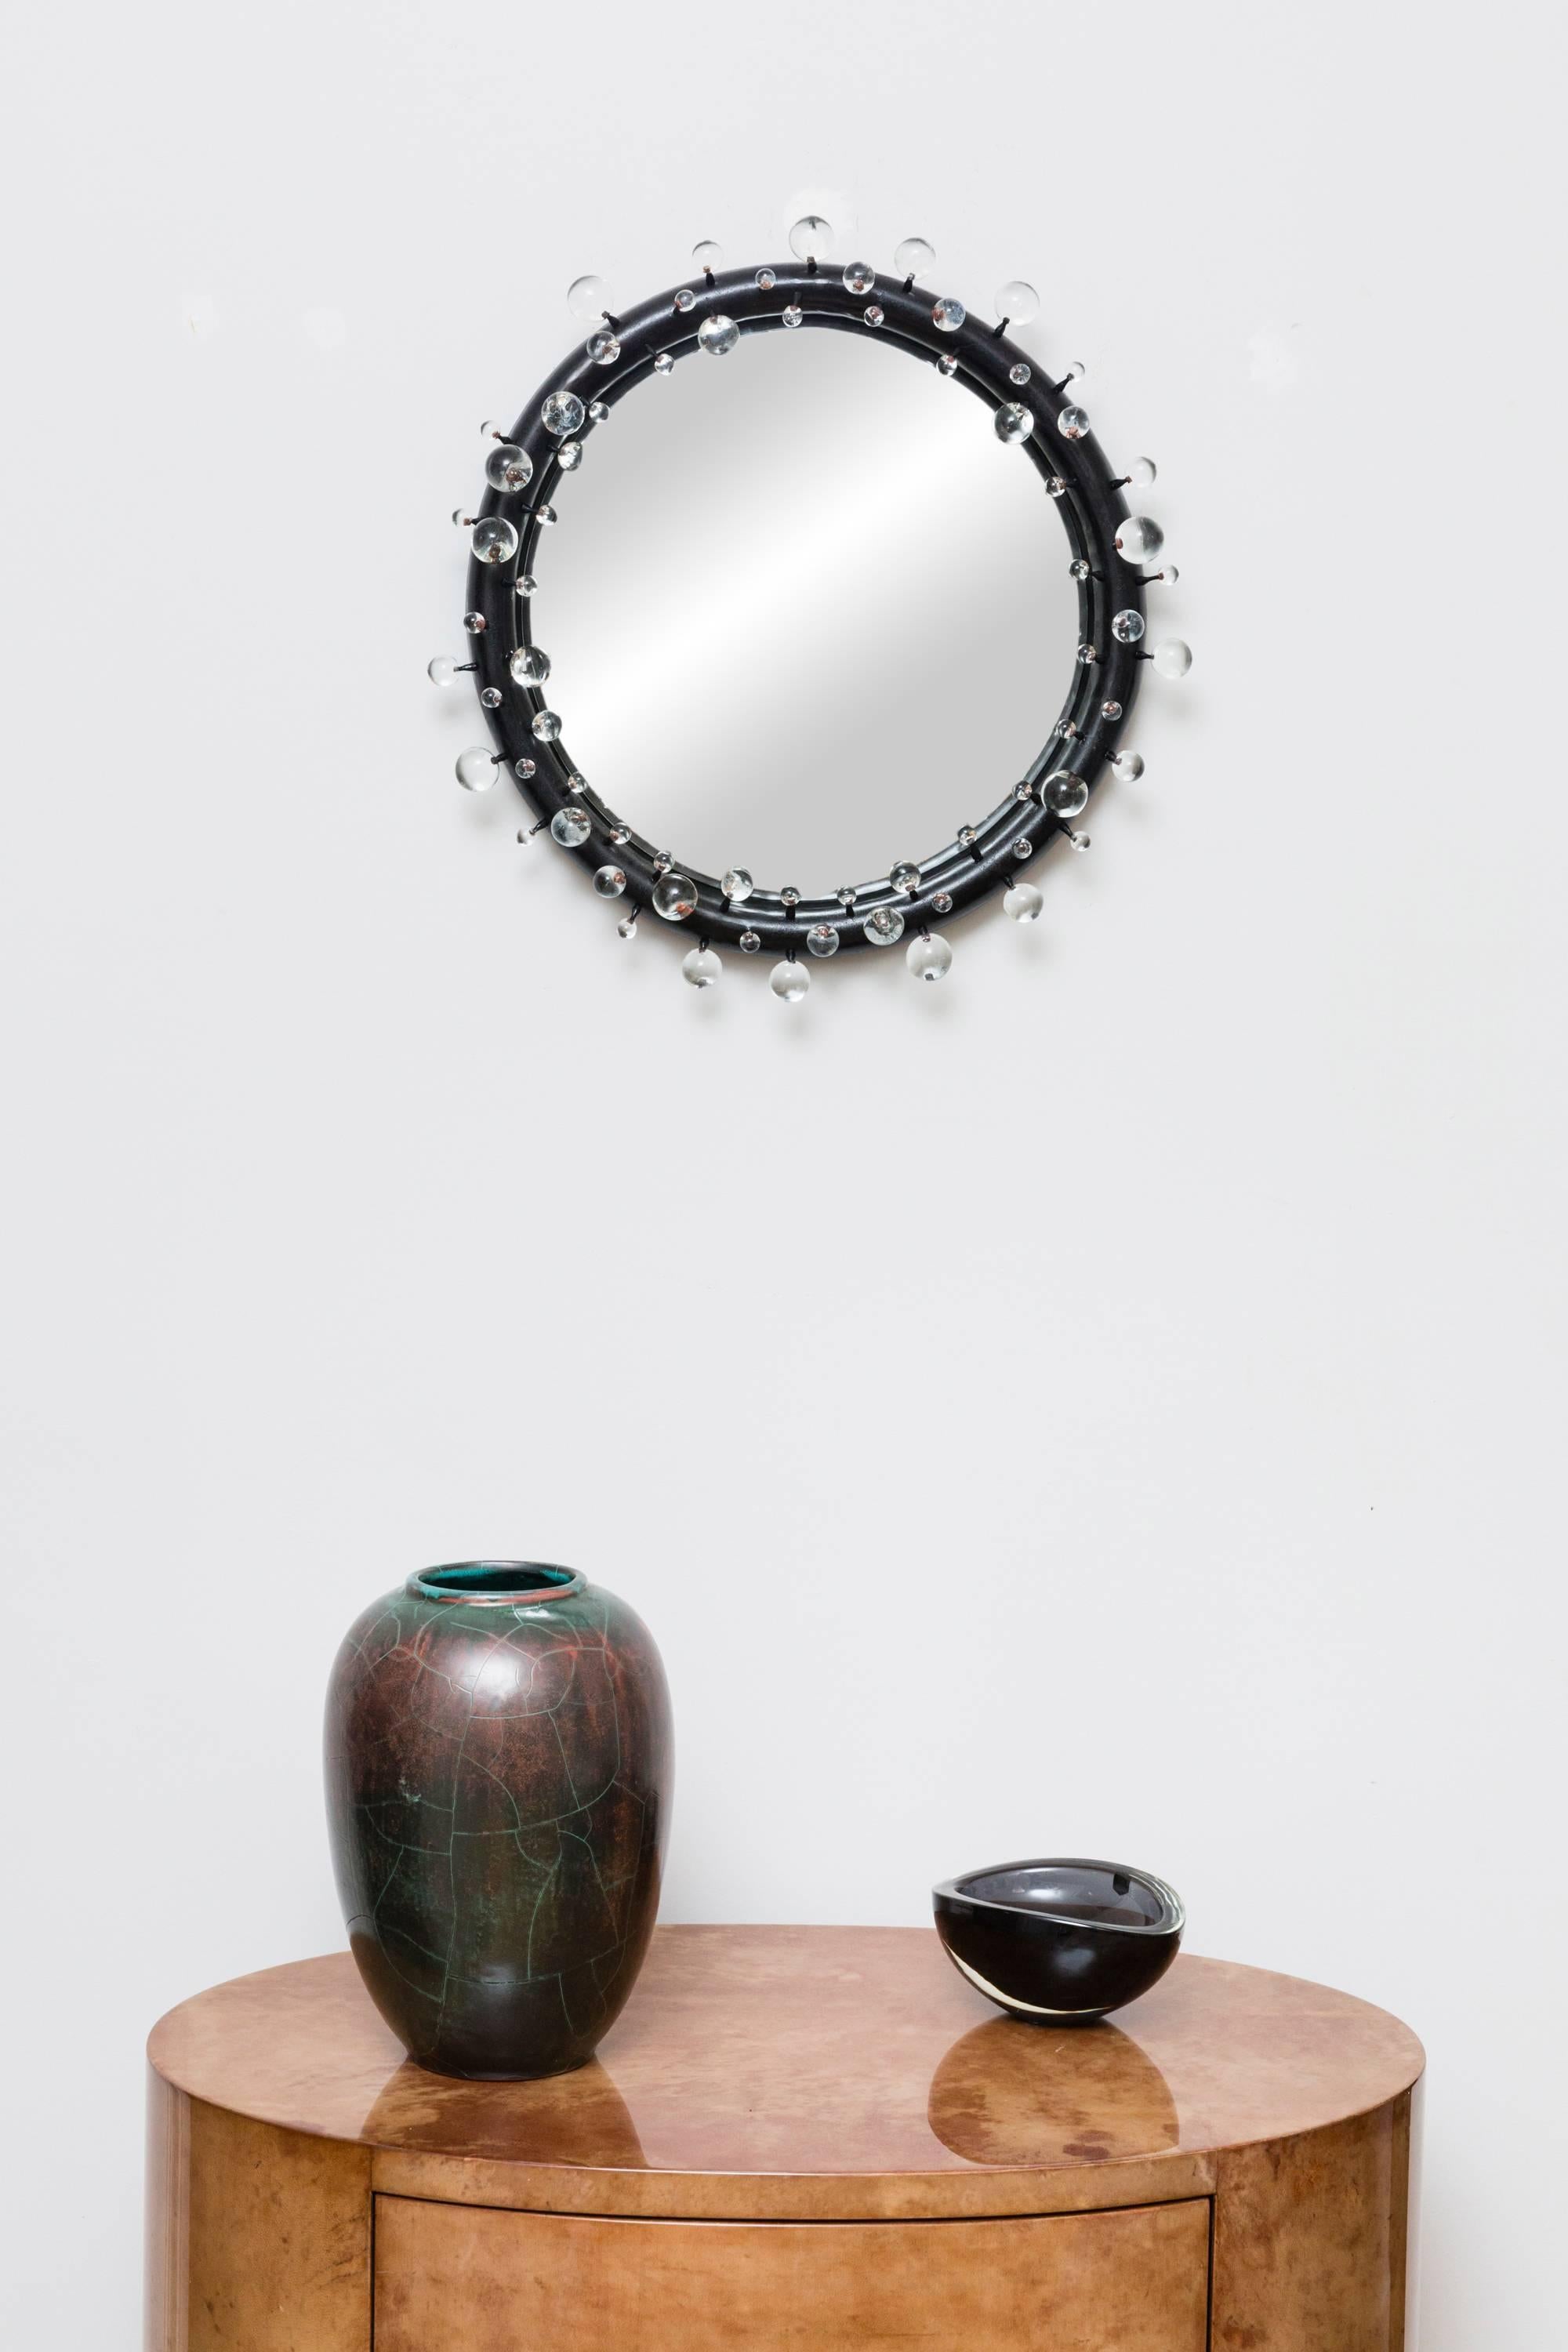 Elegant concave mirror, limited art edition, glass concave mirror, blackened bronze frame with glass balls in different sizes, diameter 48 cm. 